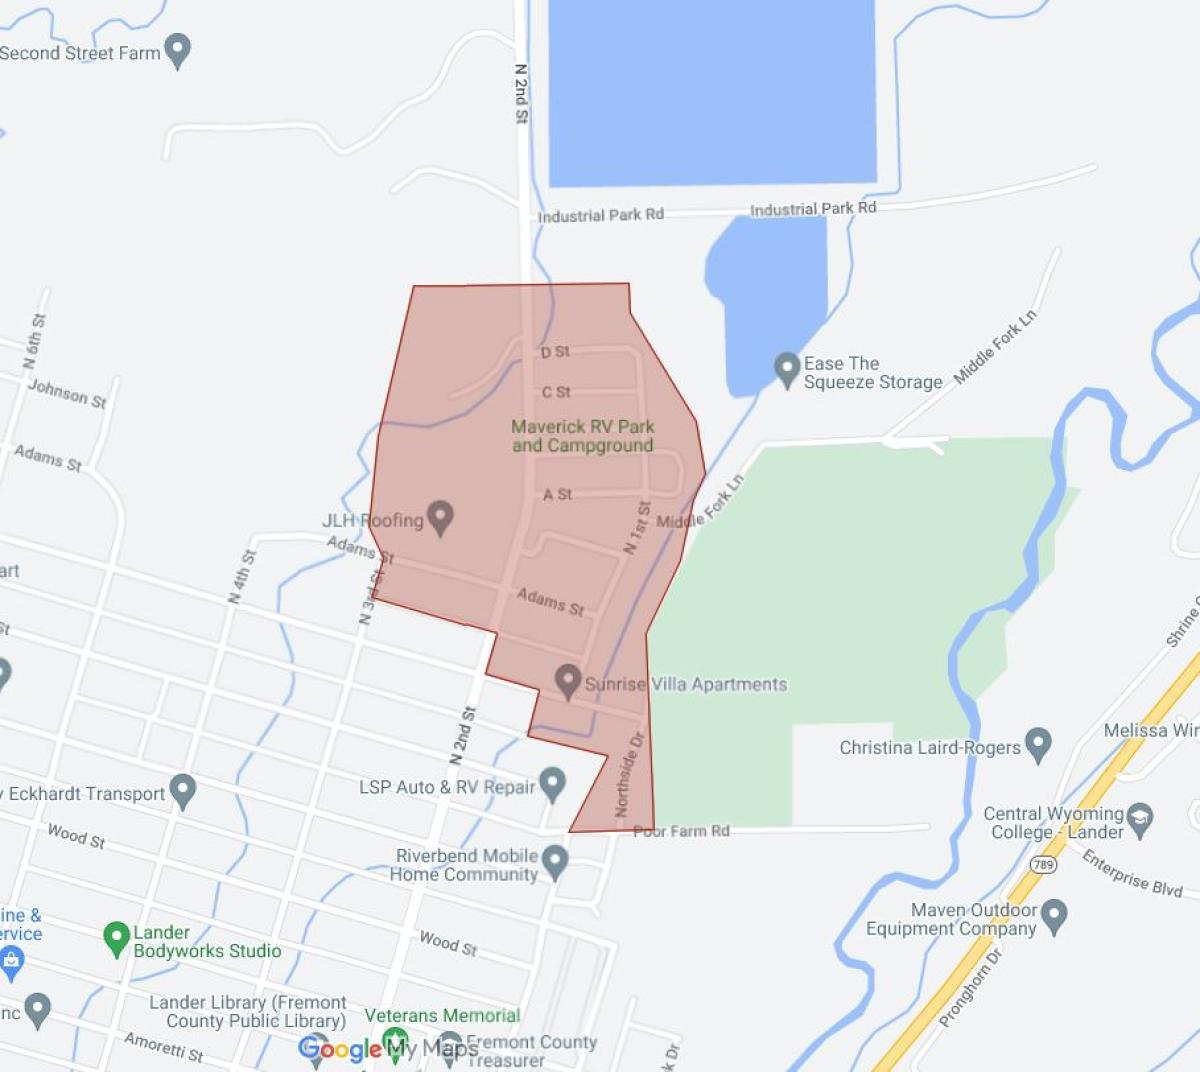 Map Image of Water Outage